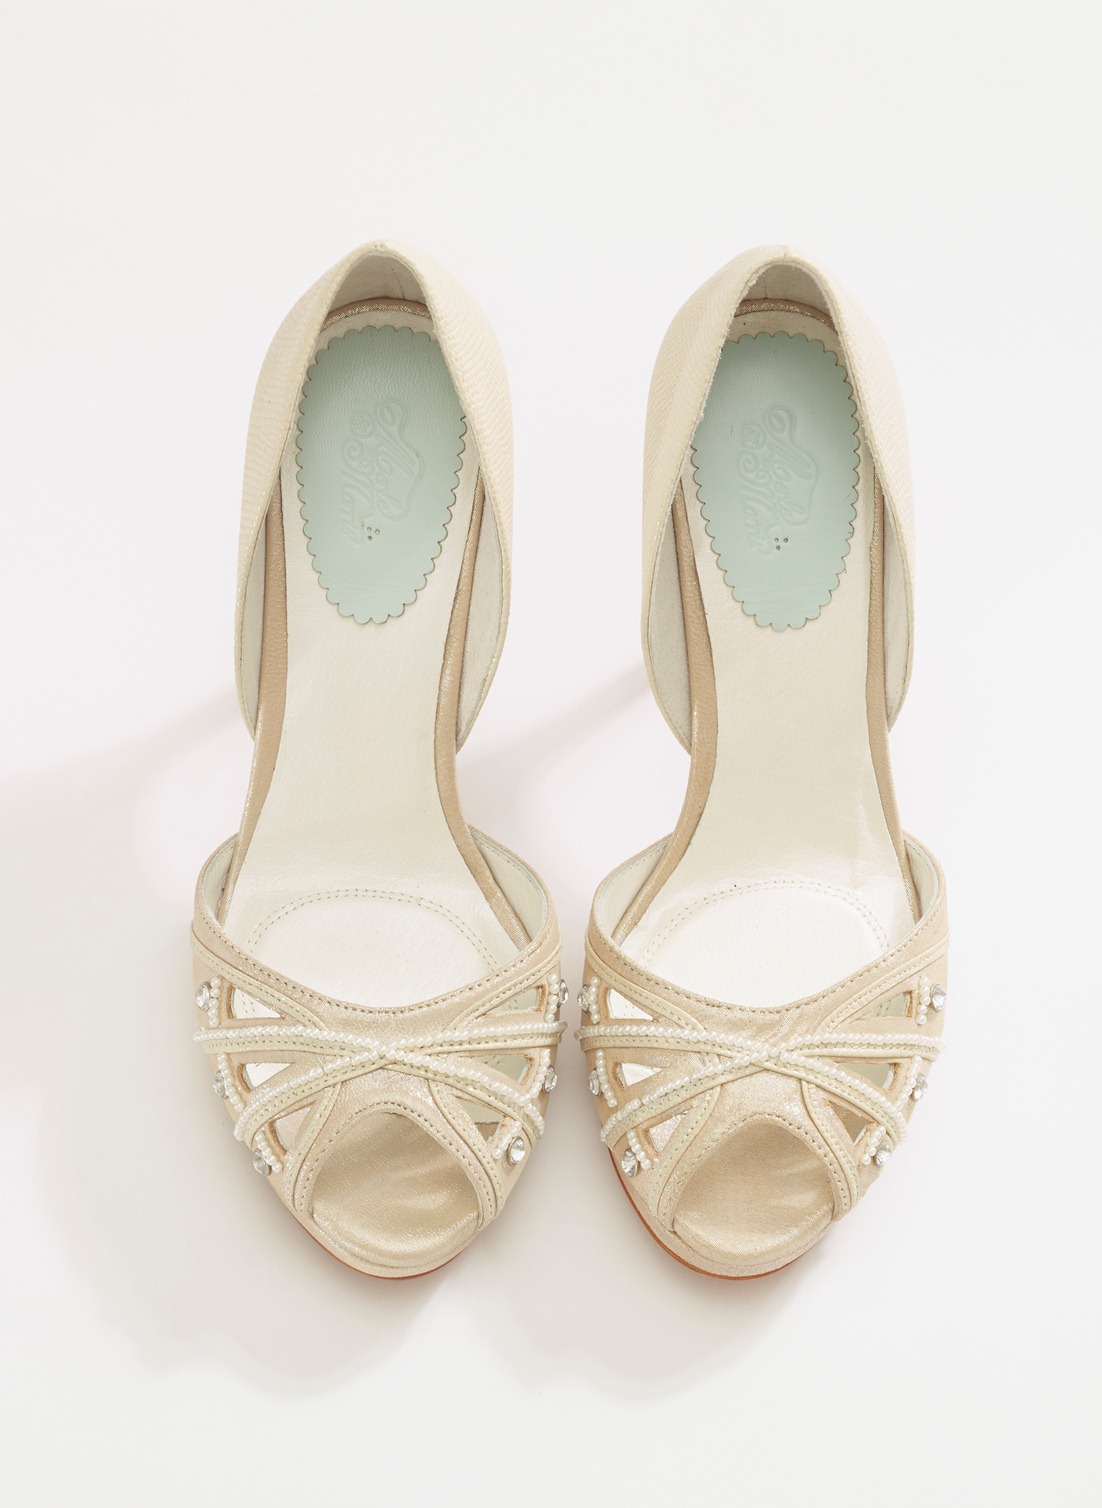 Beautiful Bridal Shoes from Merle & Morris - Anise